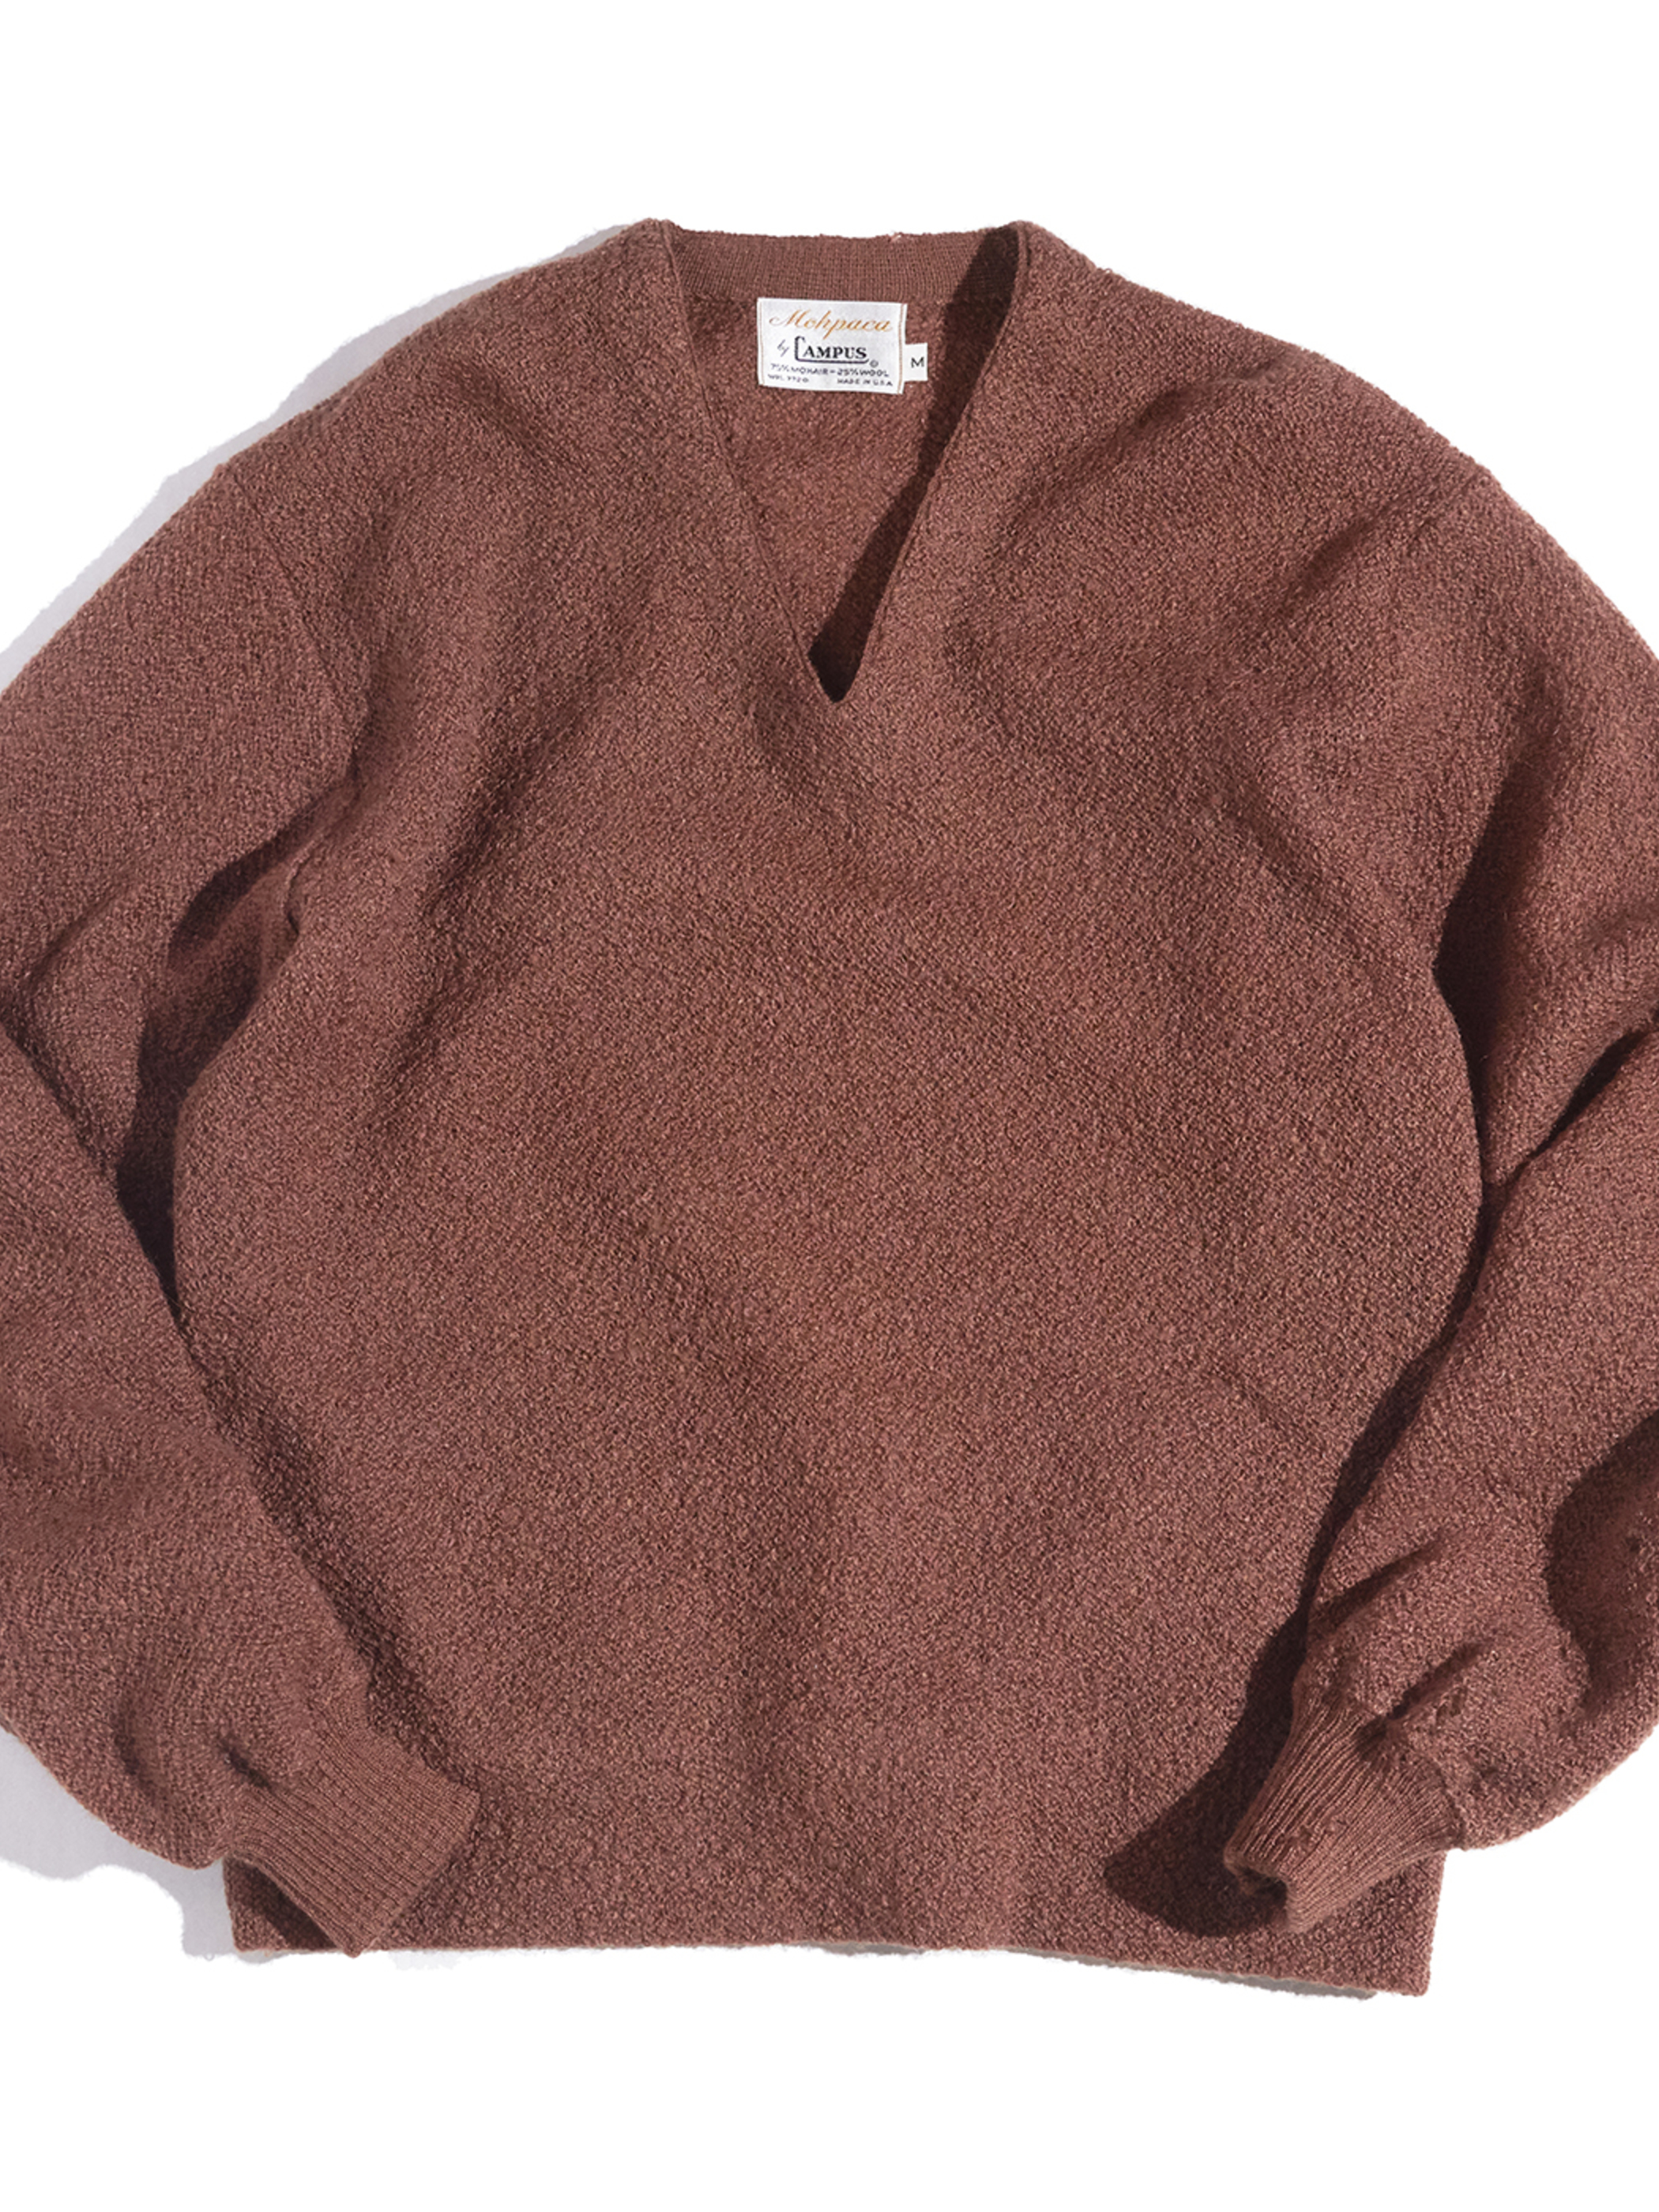 1960s "CAMPUS" mohair/wool v-neck knit -BROWN-